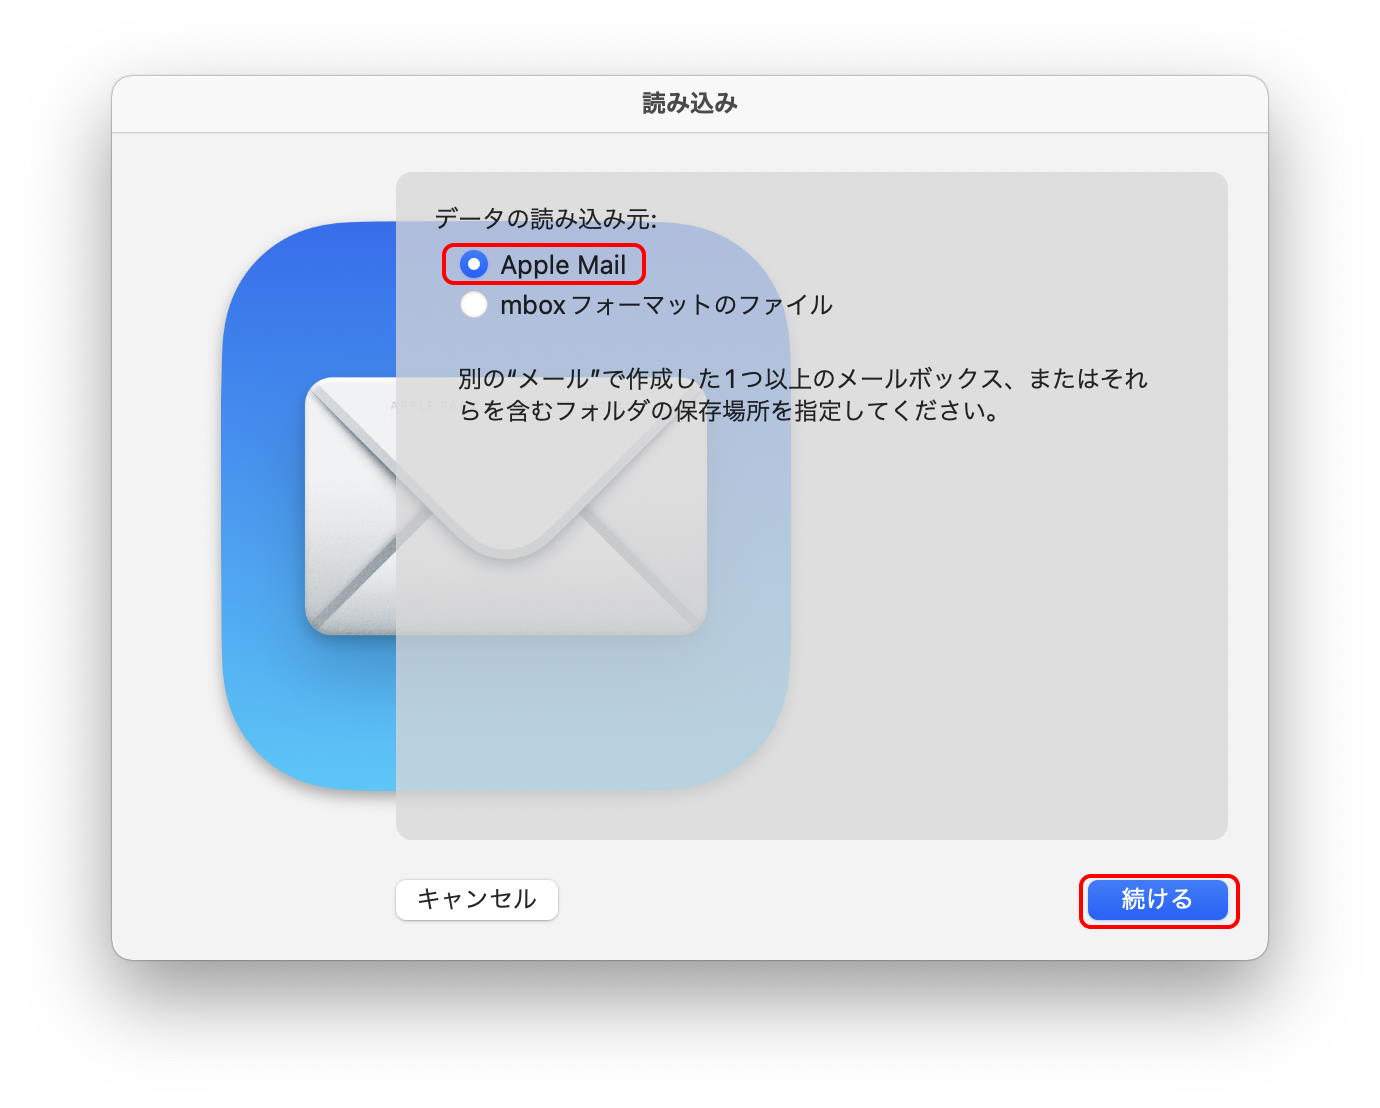 Select Apple Mail